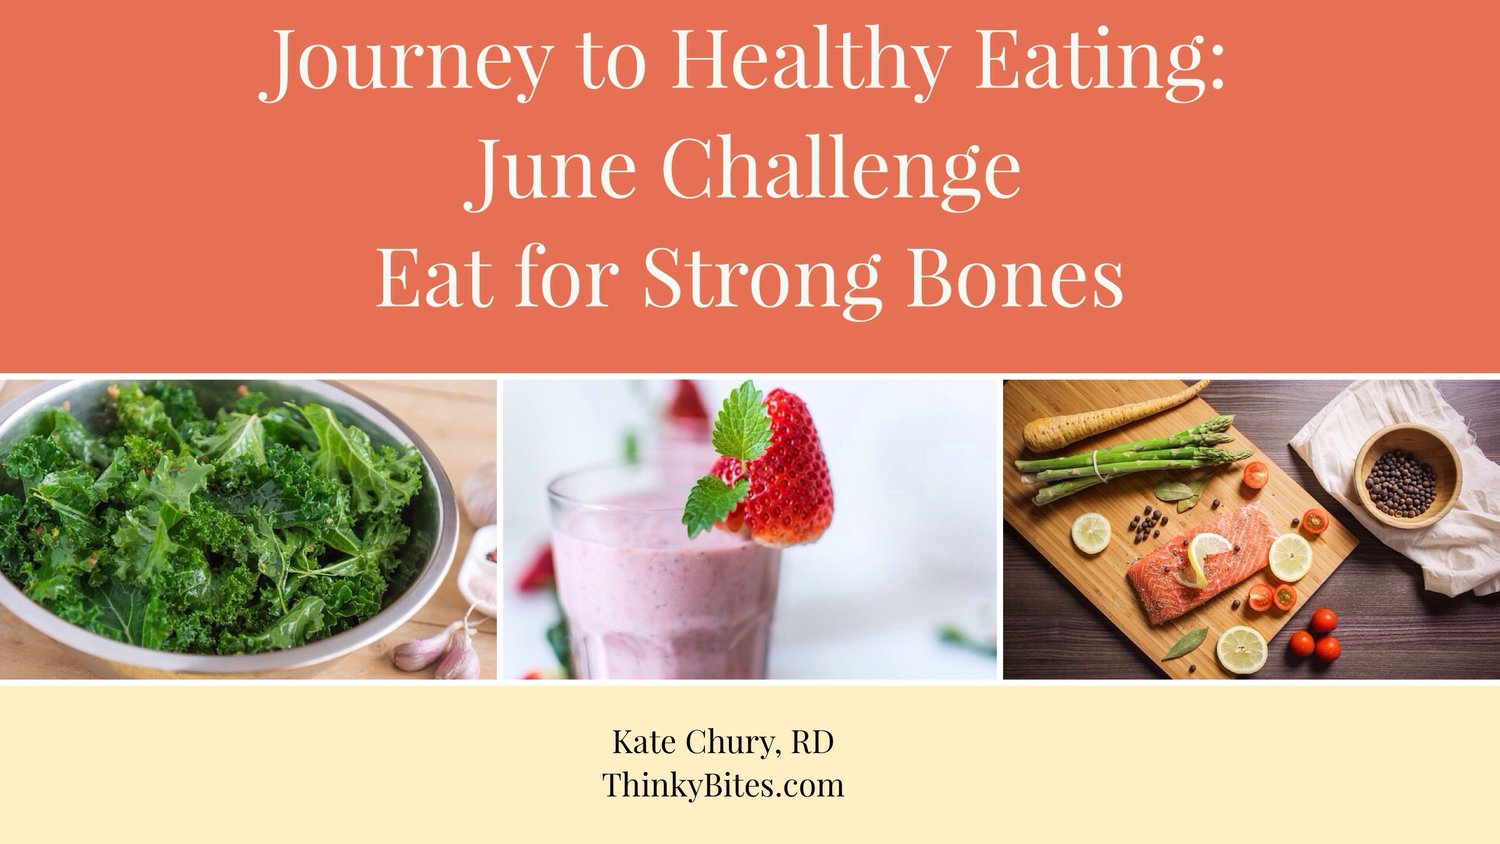 Journey to Healthy Eating 2017 - June Edition